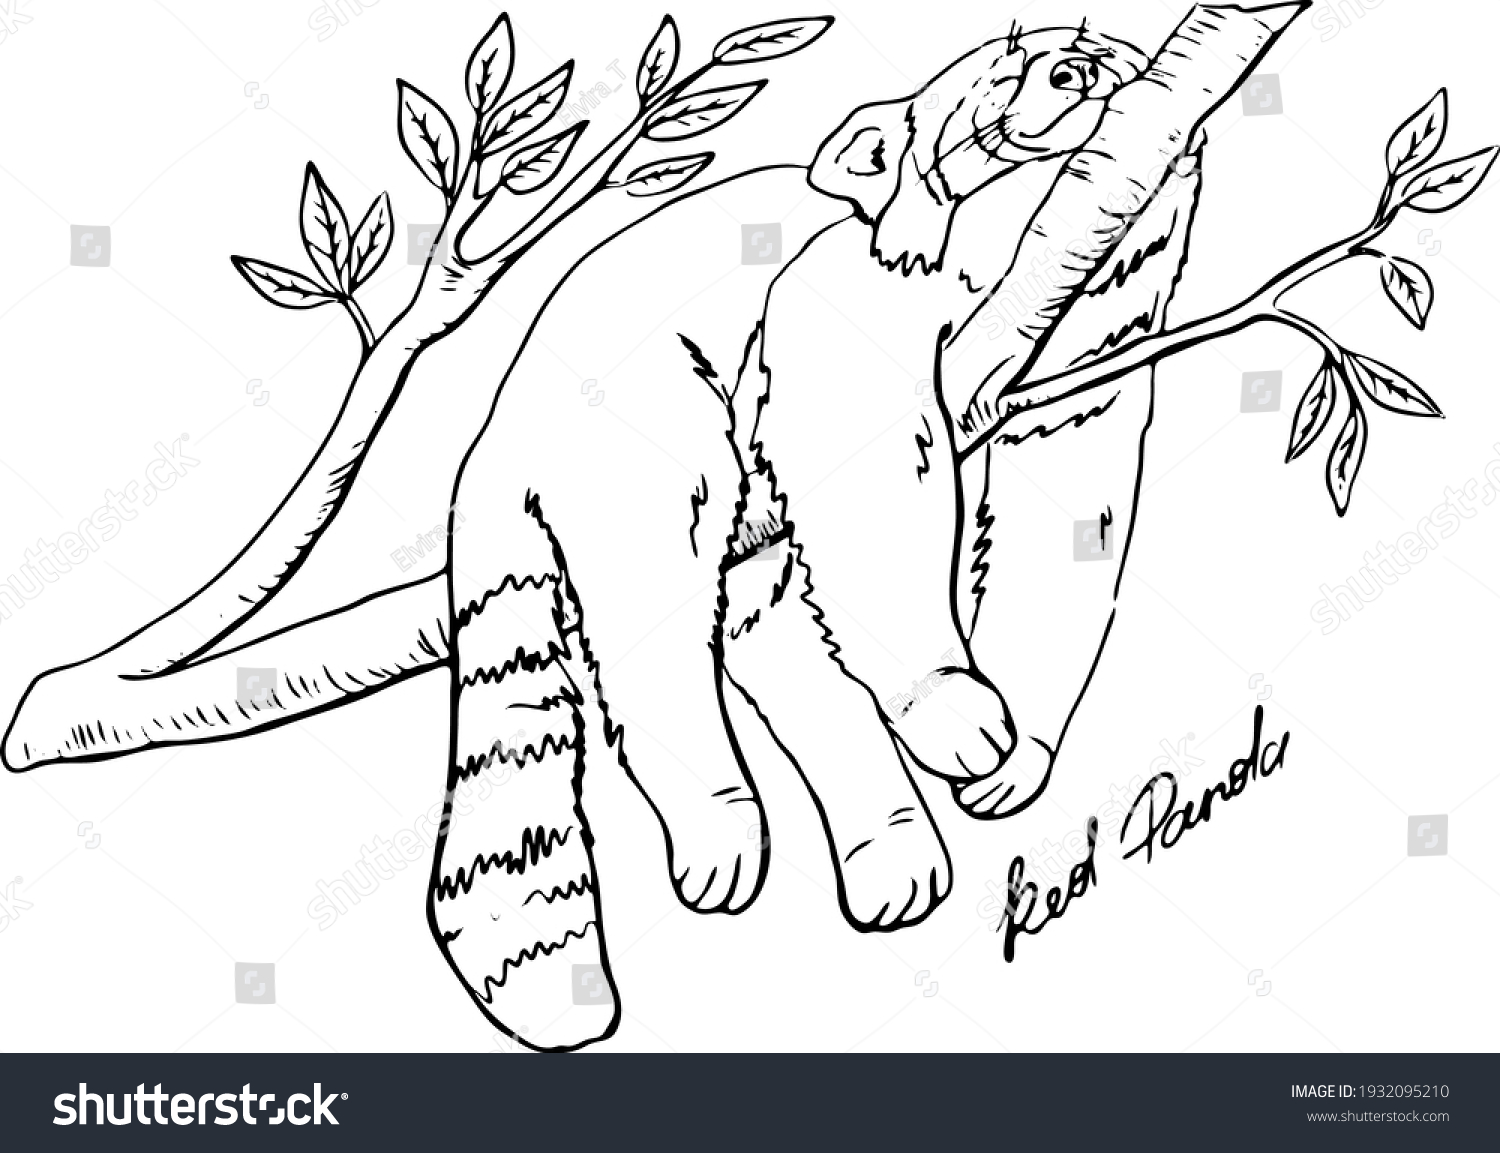 SVG of cute happy red panda lying on a branch with eyes closed and enjoying the rest, contour black and white hand drawing, coloring book svg